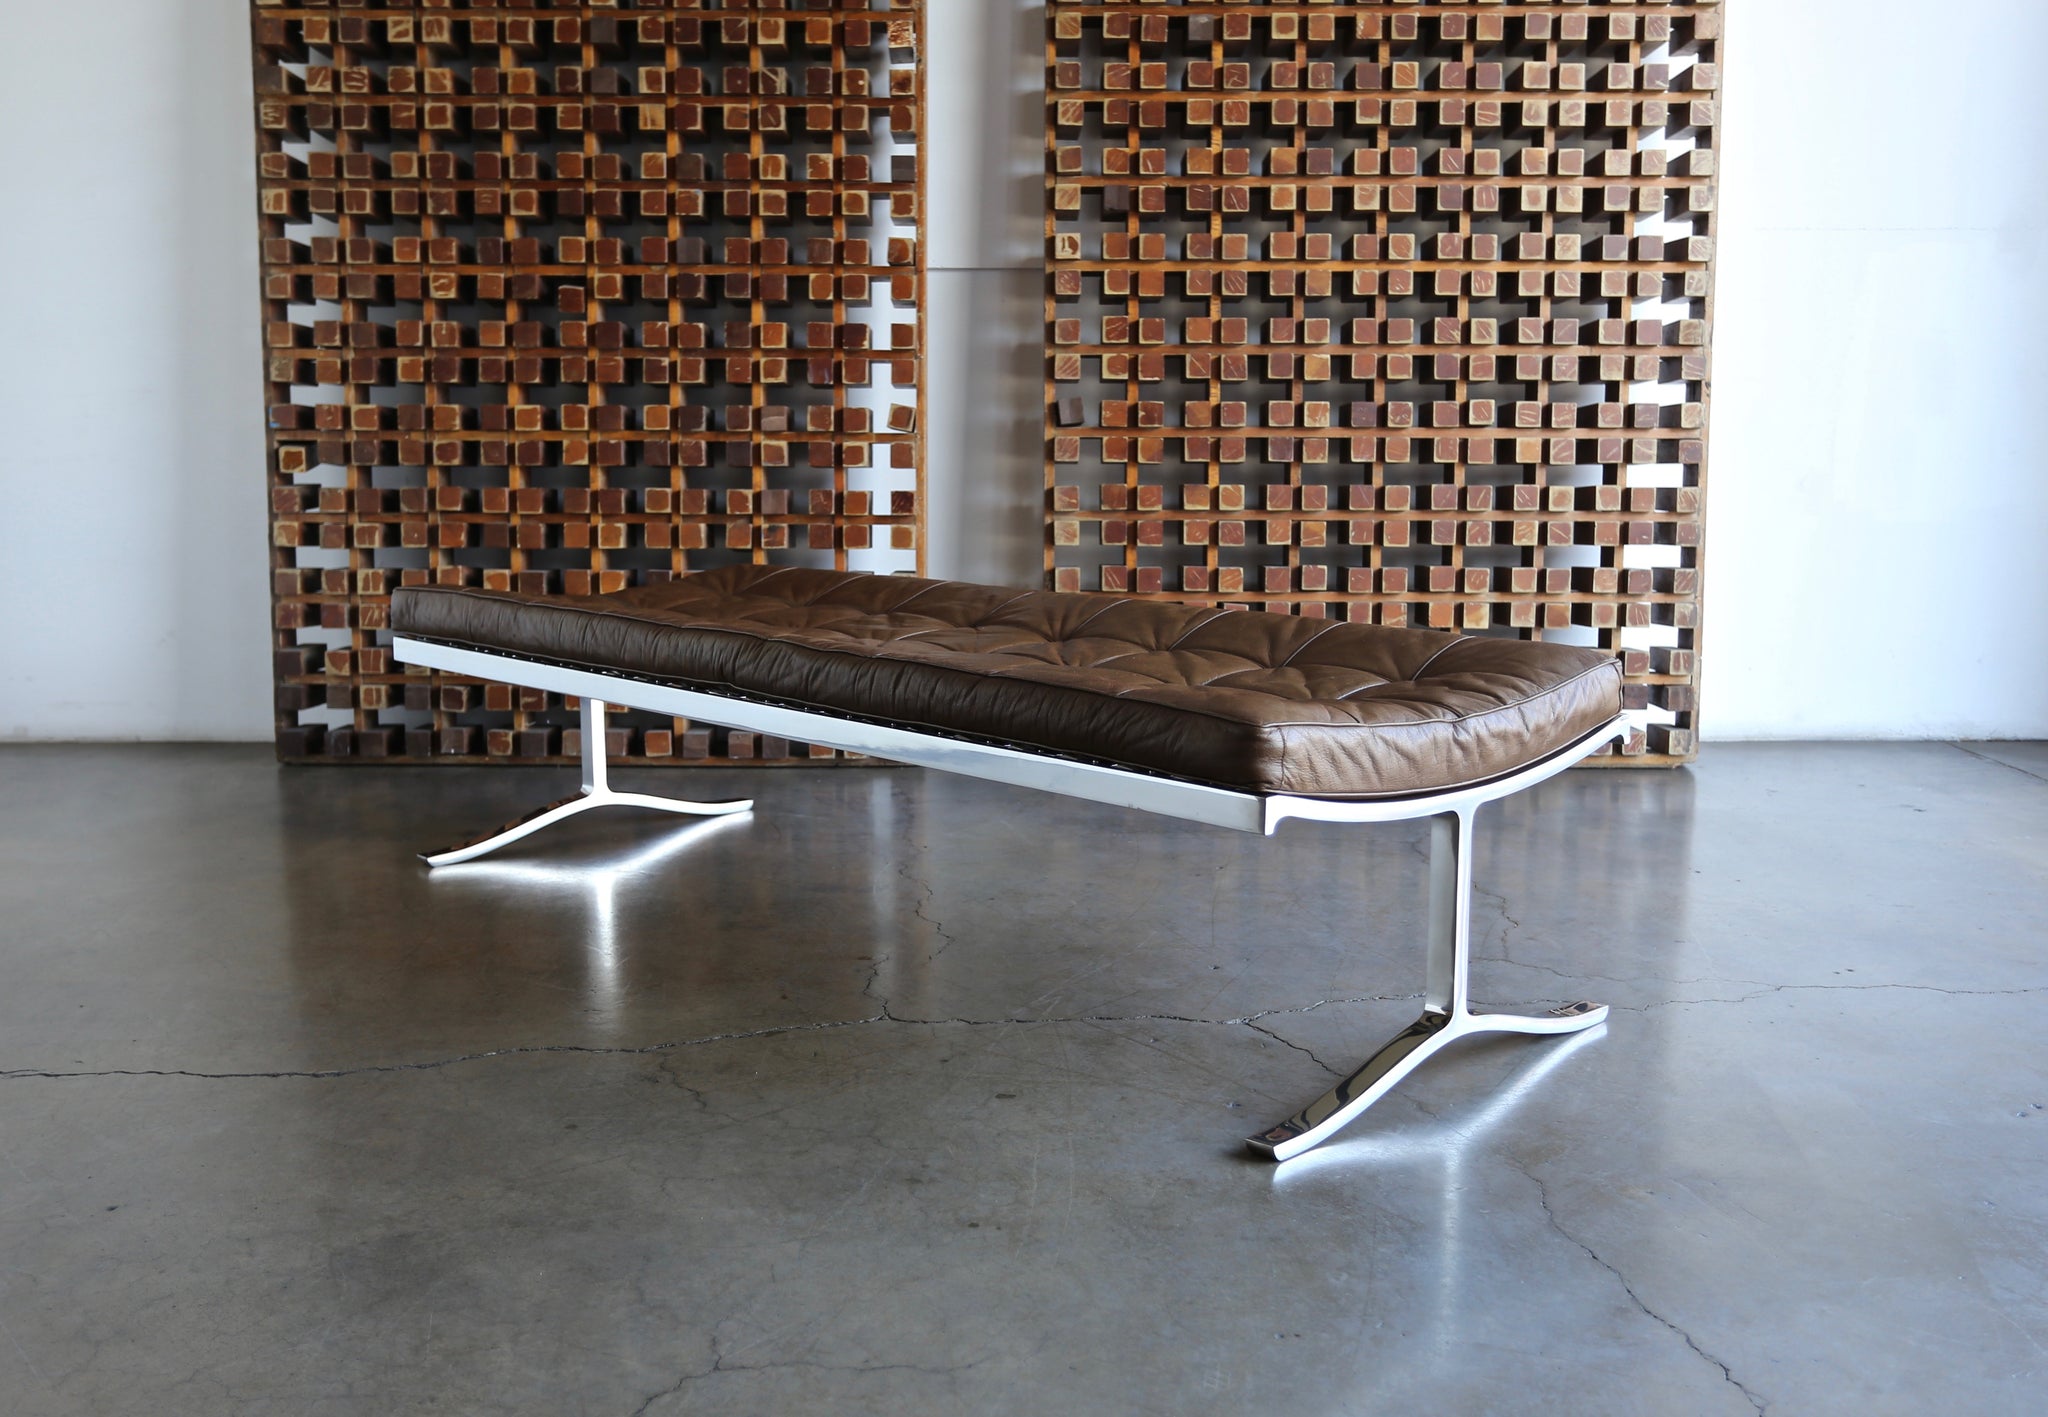 = SOLD = Nico Zographos Leather & Stainless Steel Bench circa 1975